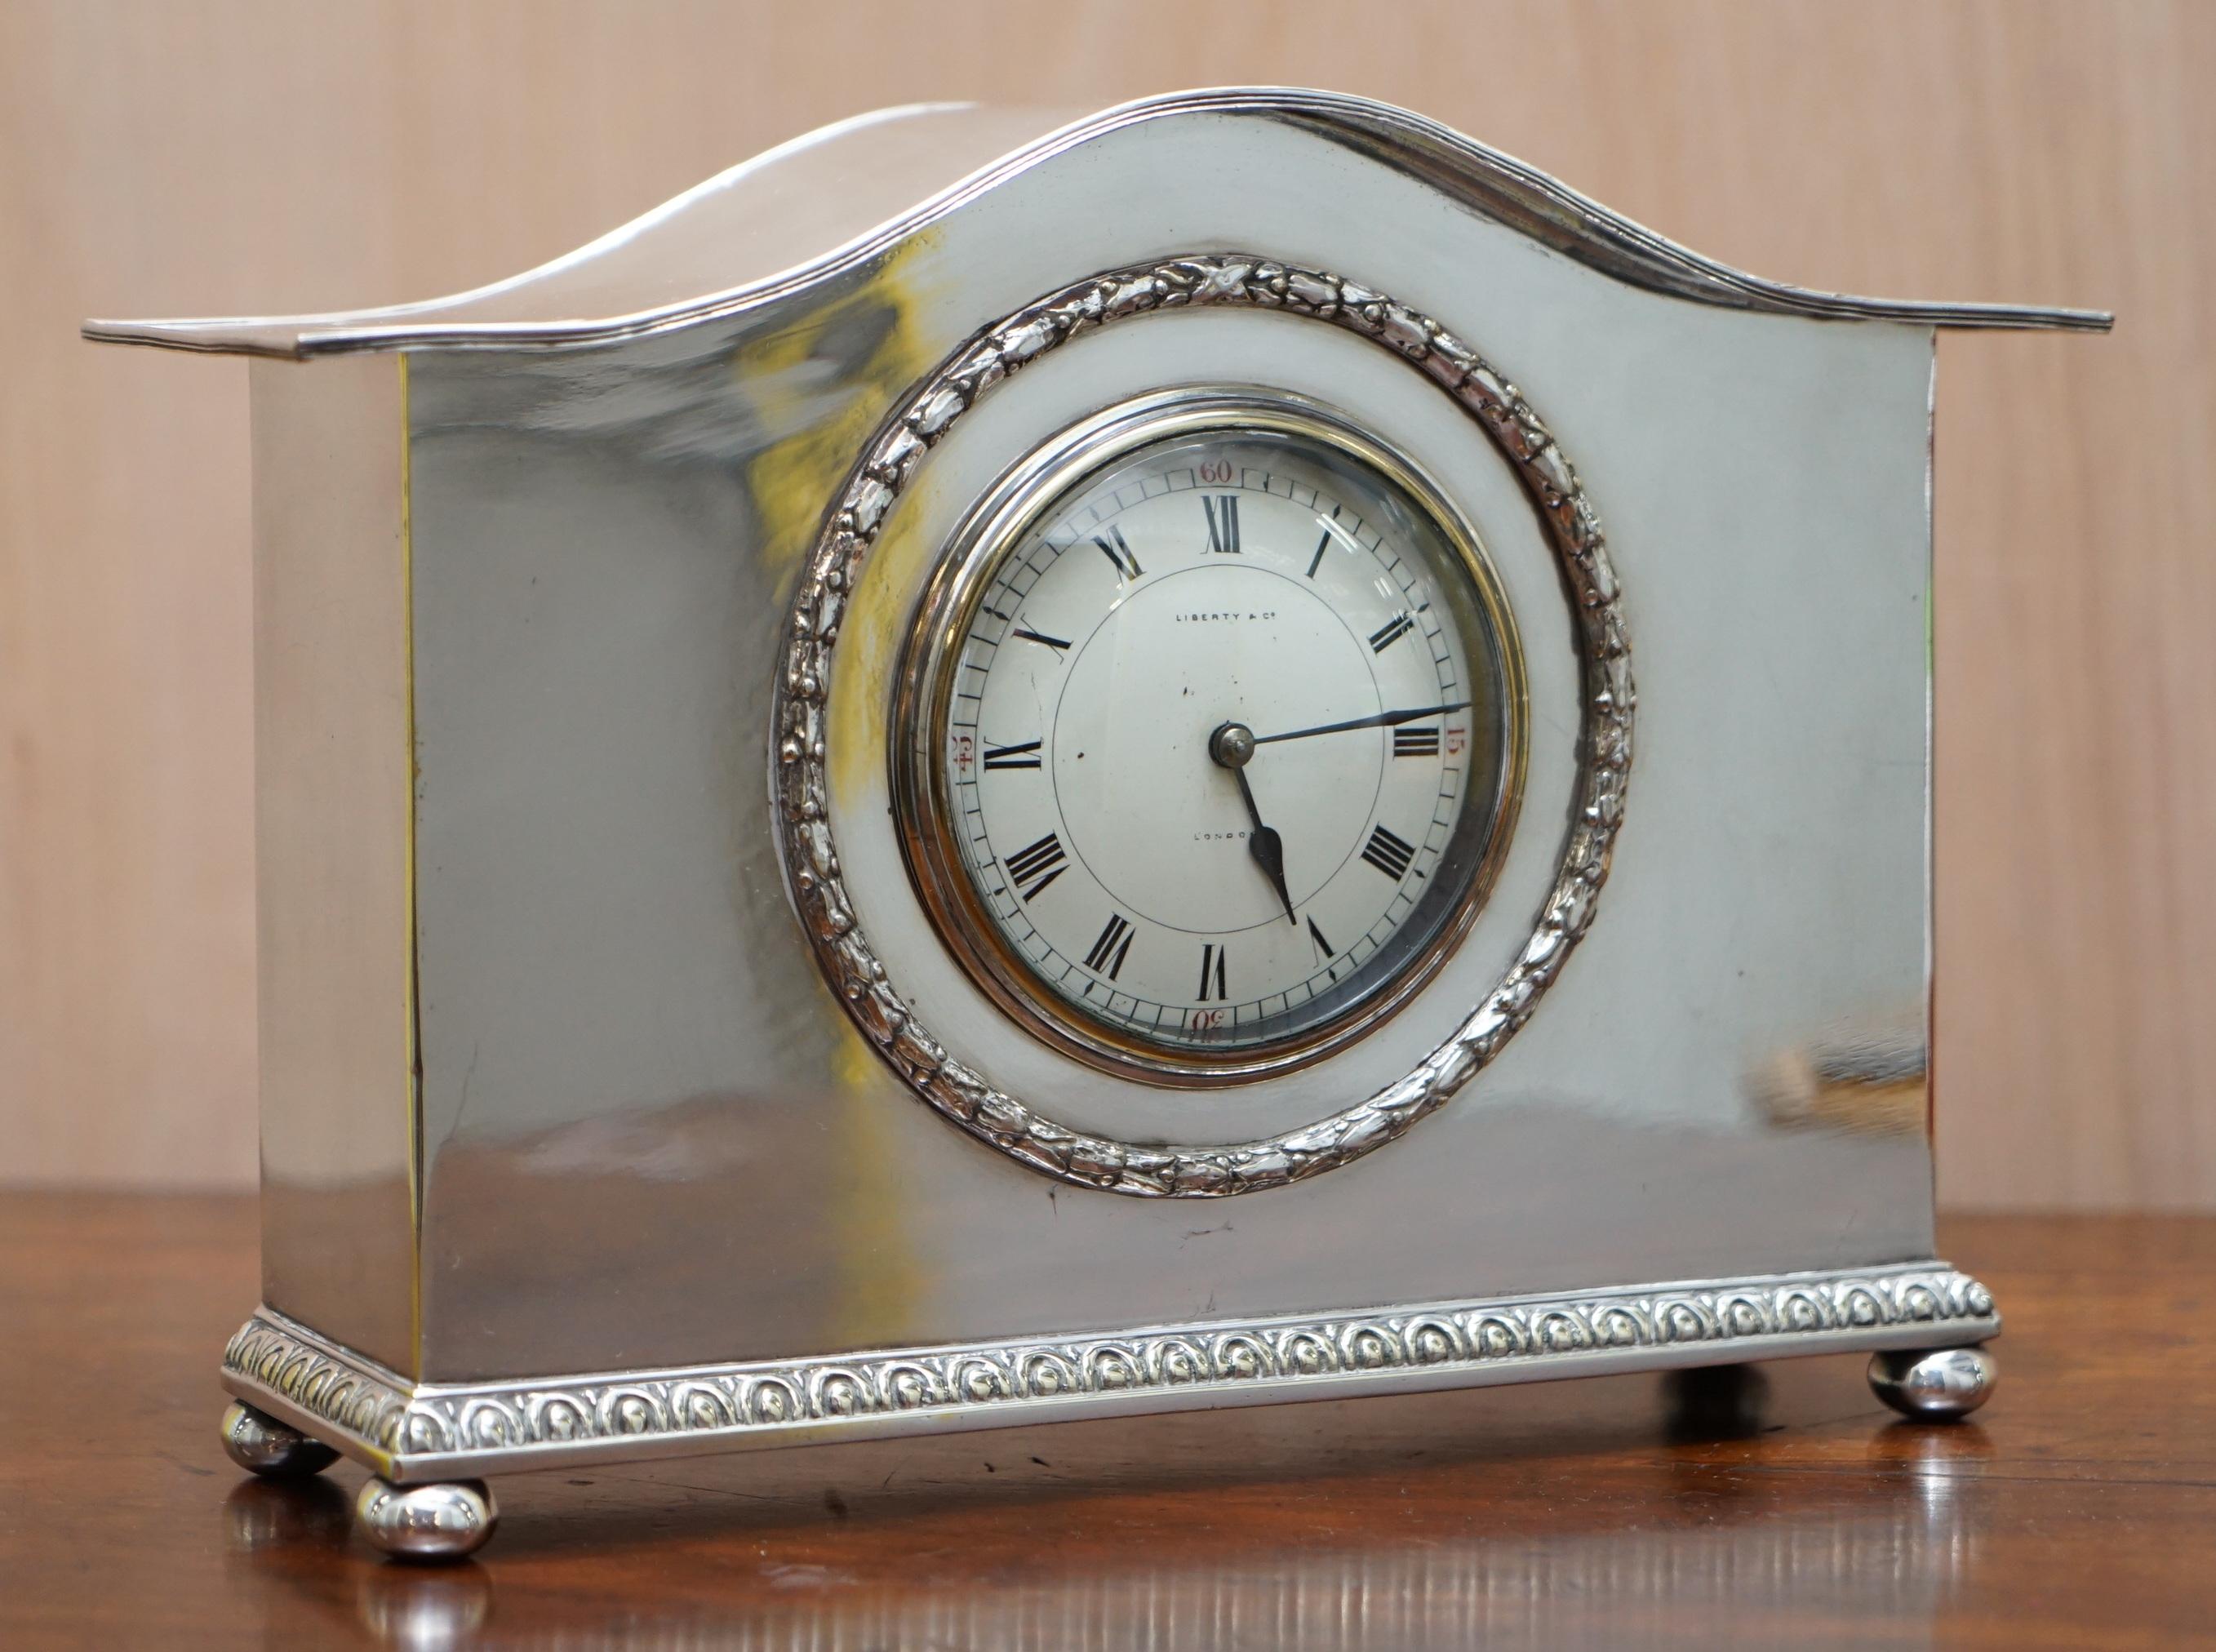 We are delighted to offer for sale this lovely Archibald Knox sterling silver plated Liberty & Co. London mantle clock

This clock is part of a suite, I have a Pewter enamel Knox Liberty carriage clock listed under my other items and two very rare